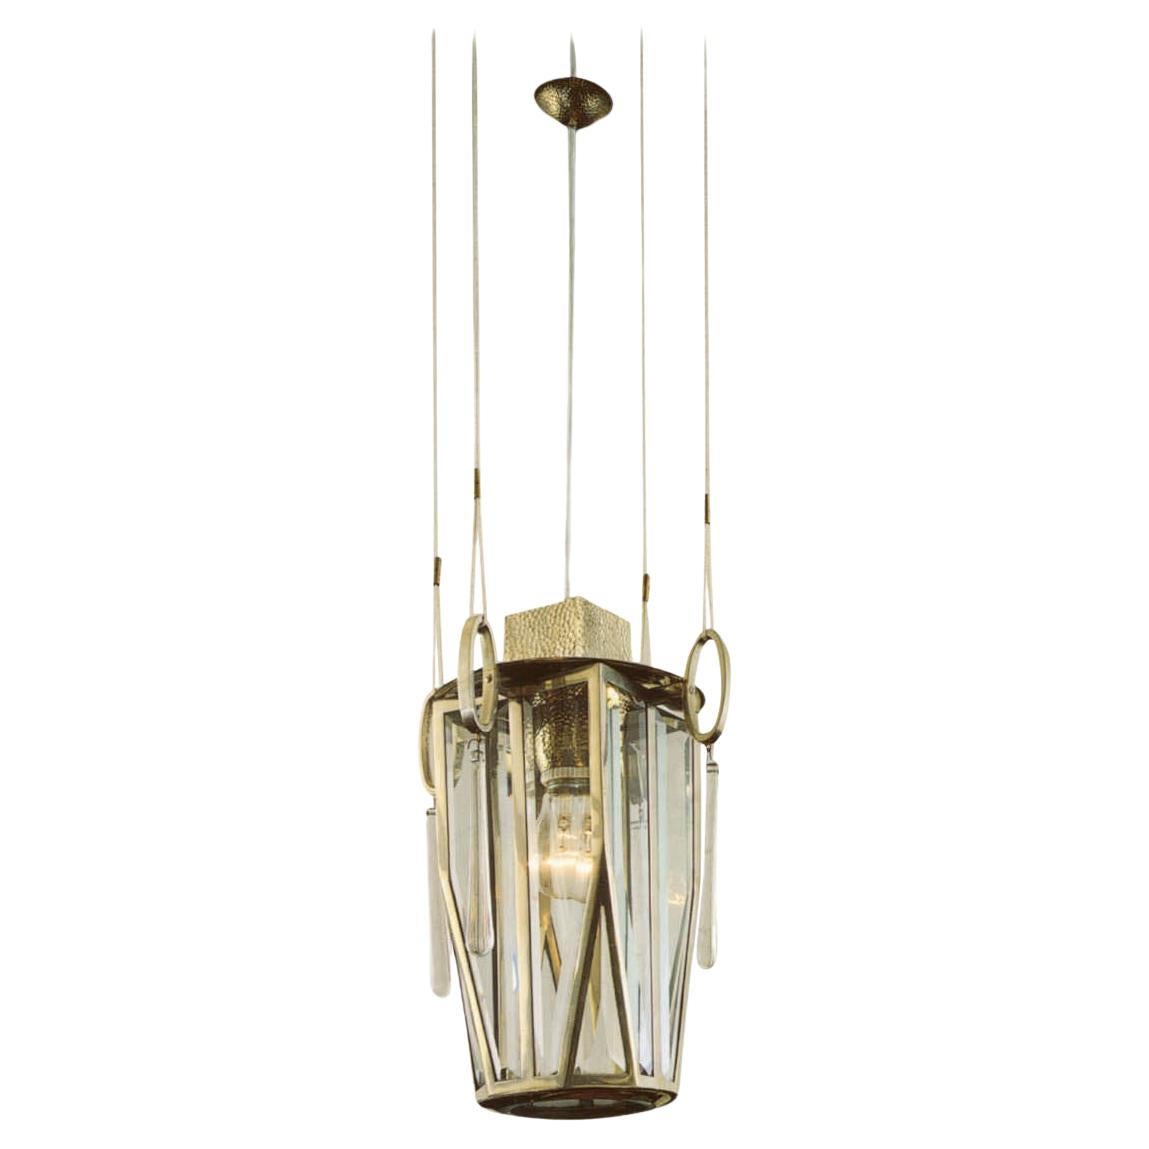  Lantern for the Baroness Magda Mautner Markhof, brass hammered silver plated